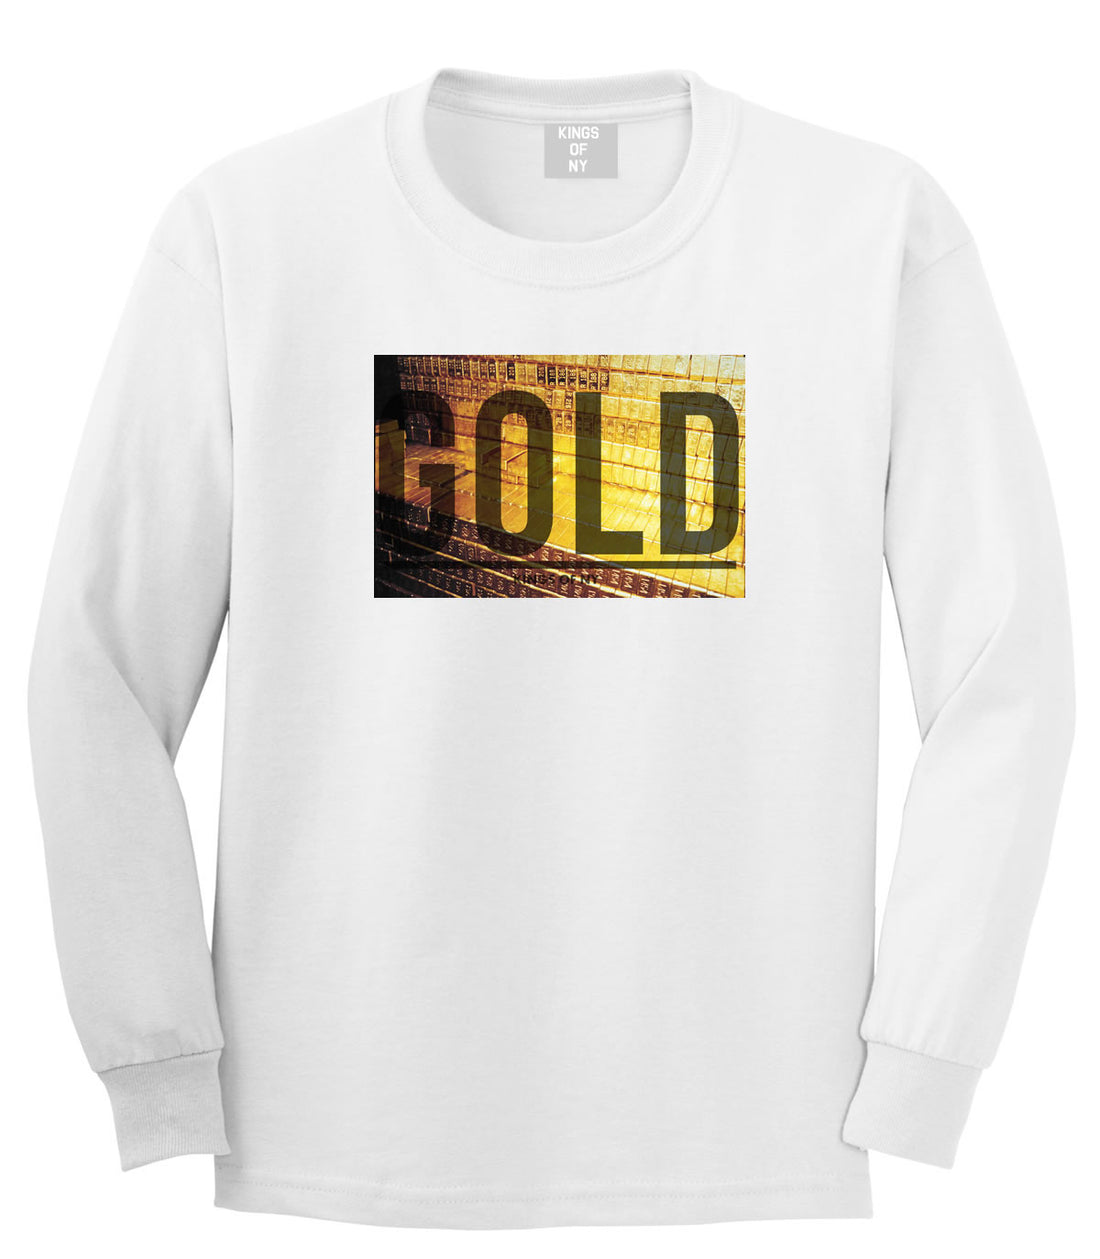 Gold Bricks Money Luxury Bank Cash Long Sleeve Boys Kids T-Shirt in White by Kings Of NY